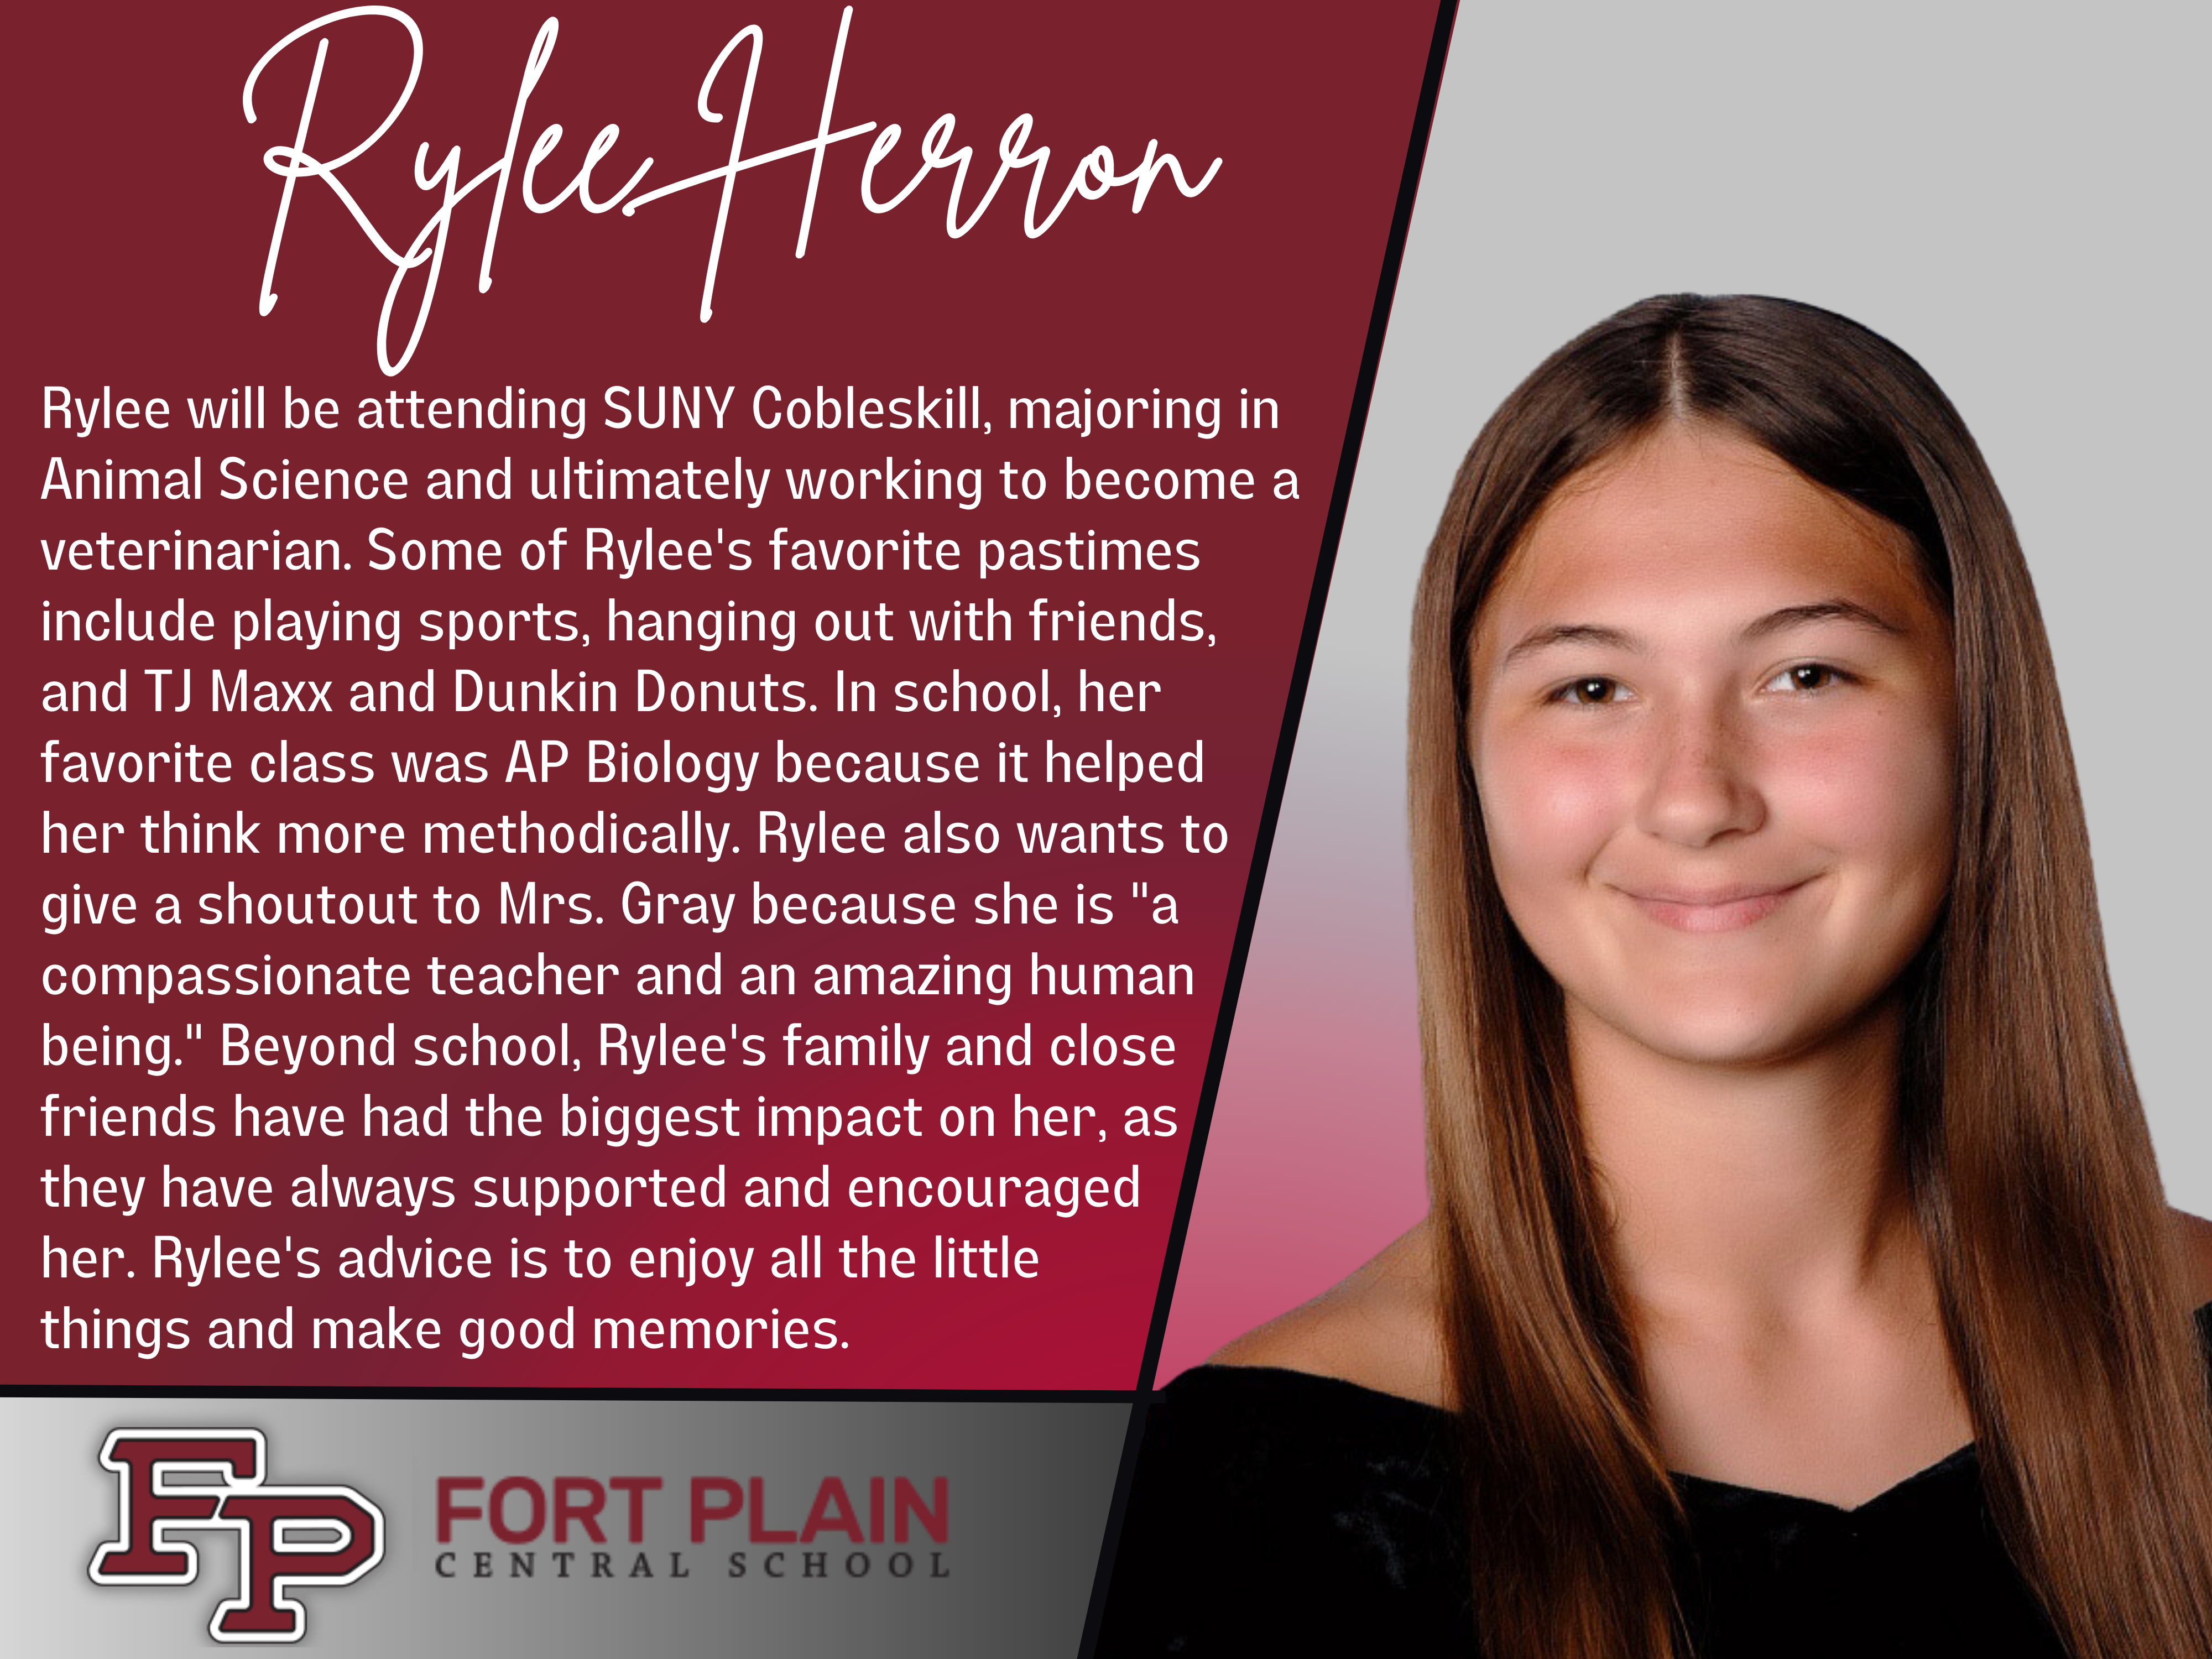 photo of and info about Rylee